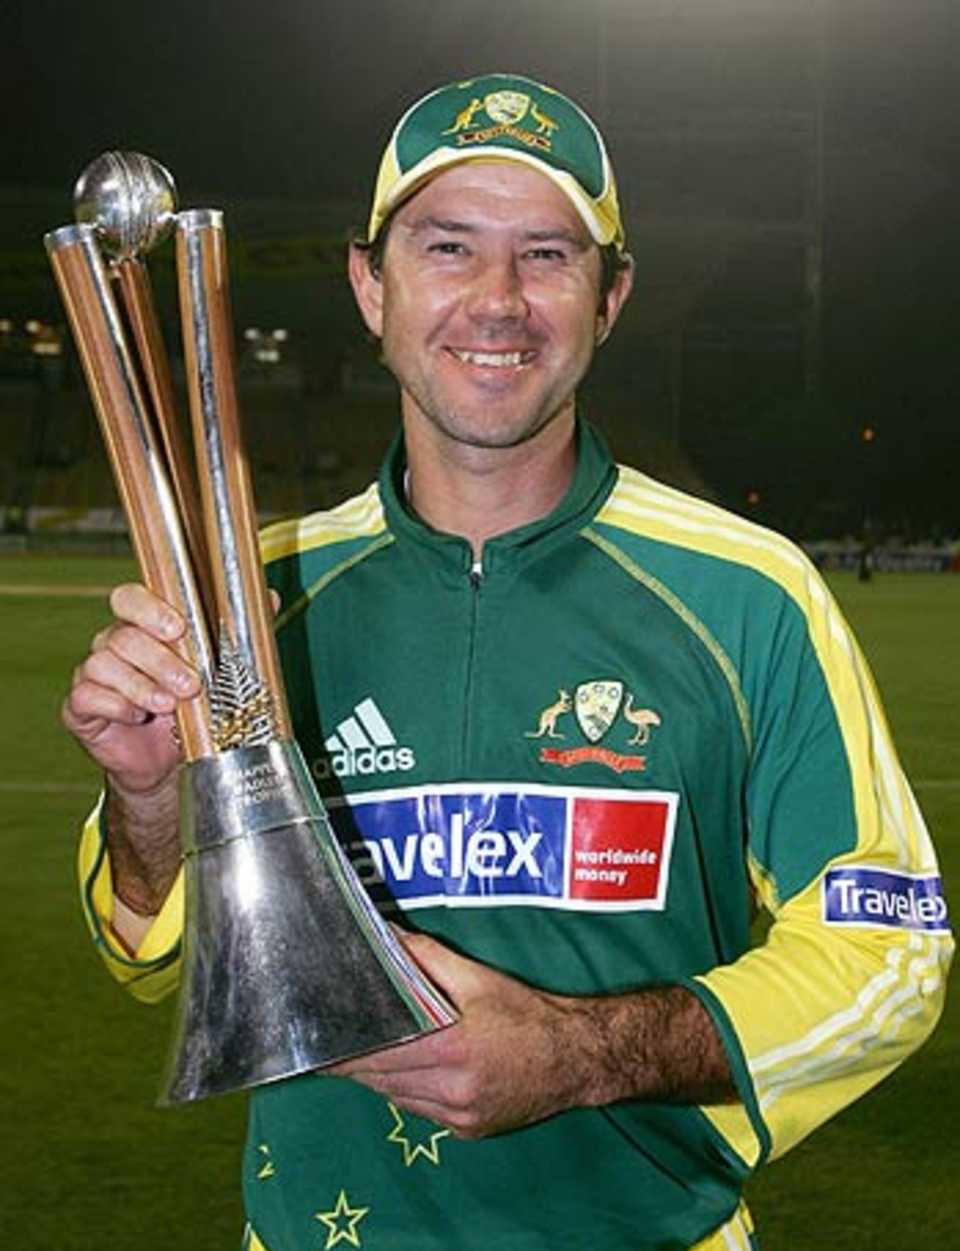 Ricky Ponting holds the Chappell-Hadlee trophy, New Zealand v Australia, 3rd ODI, Christchurch, December 10, 2005